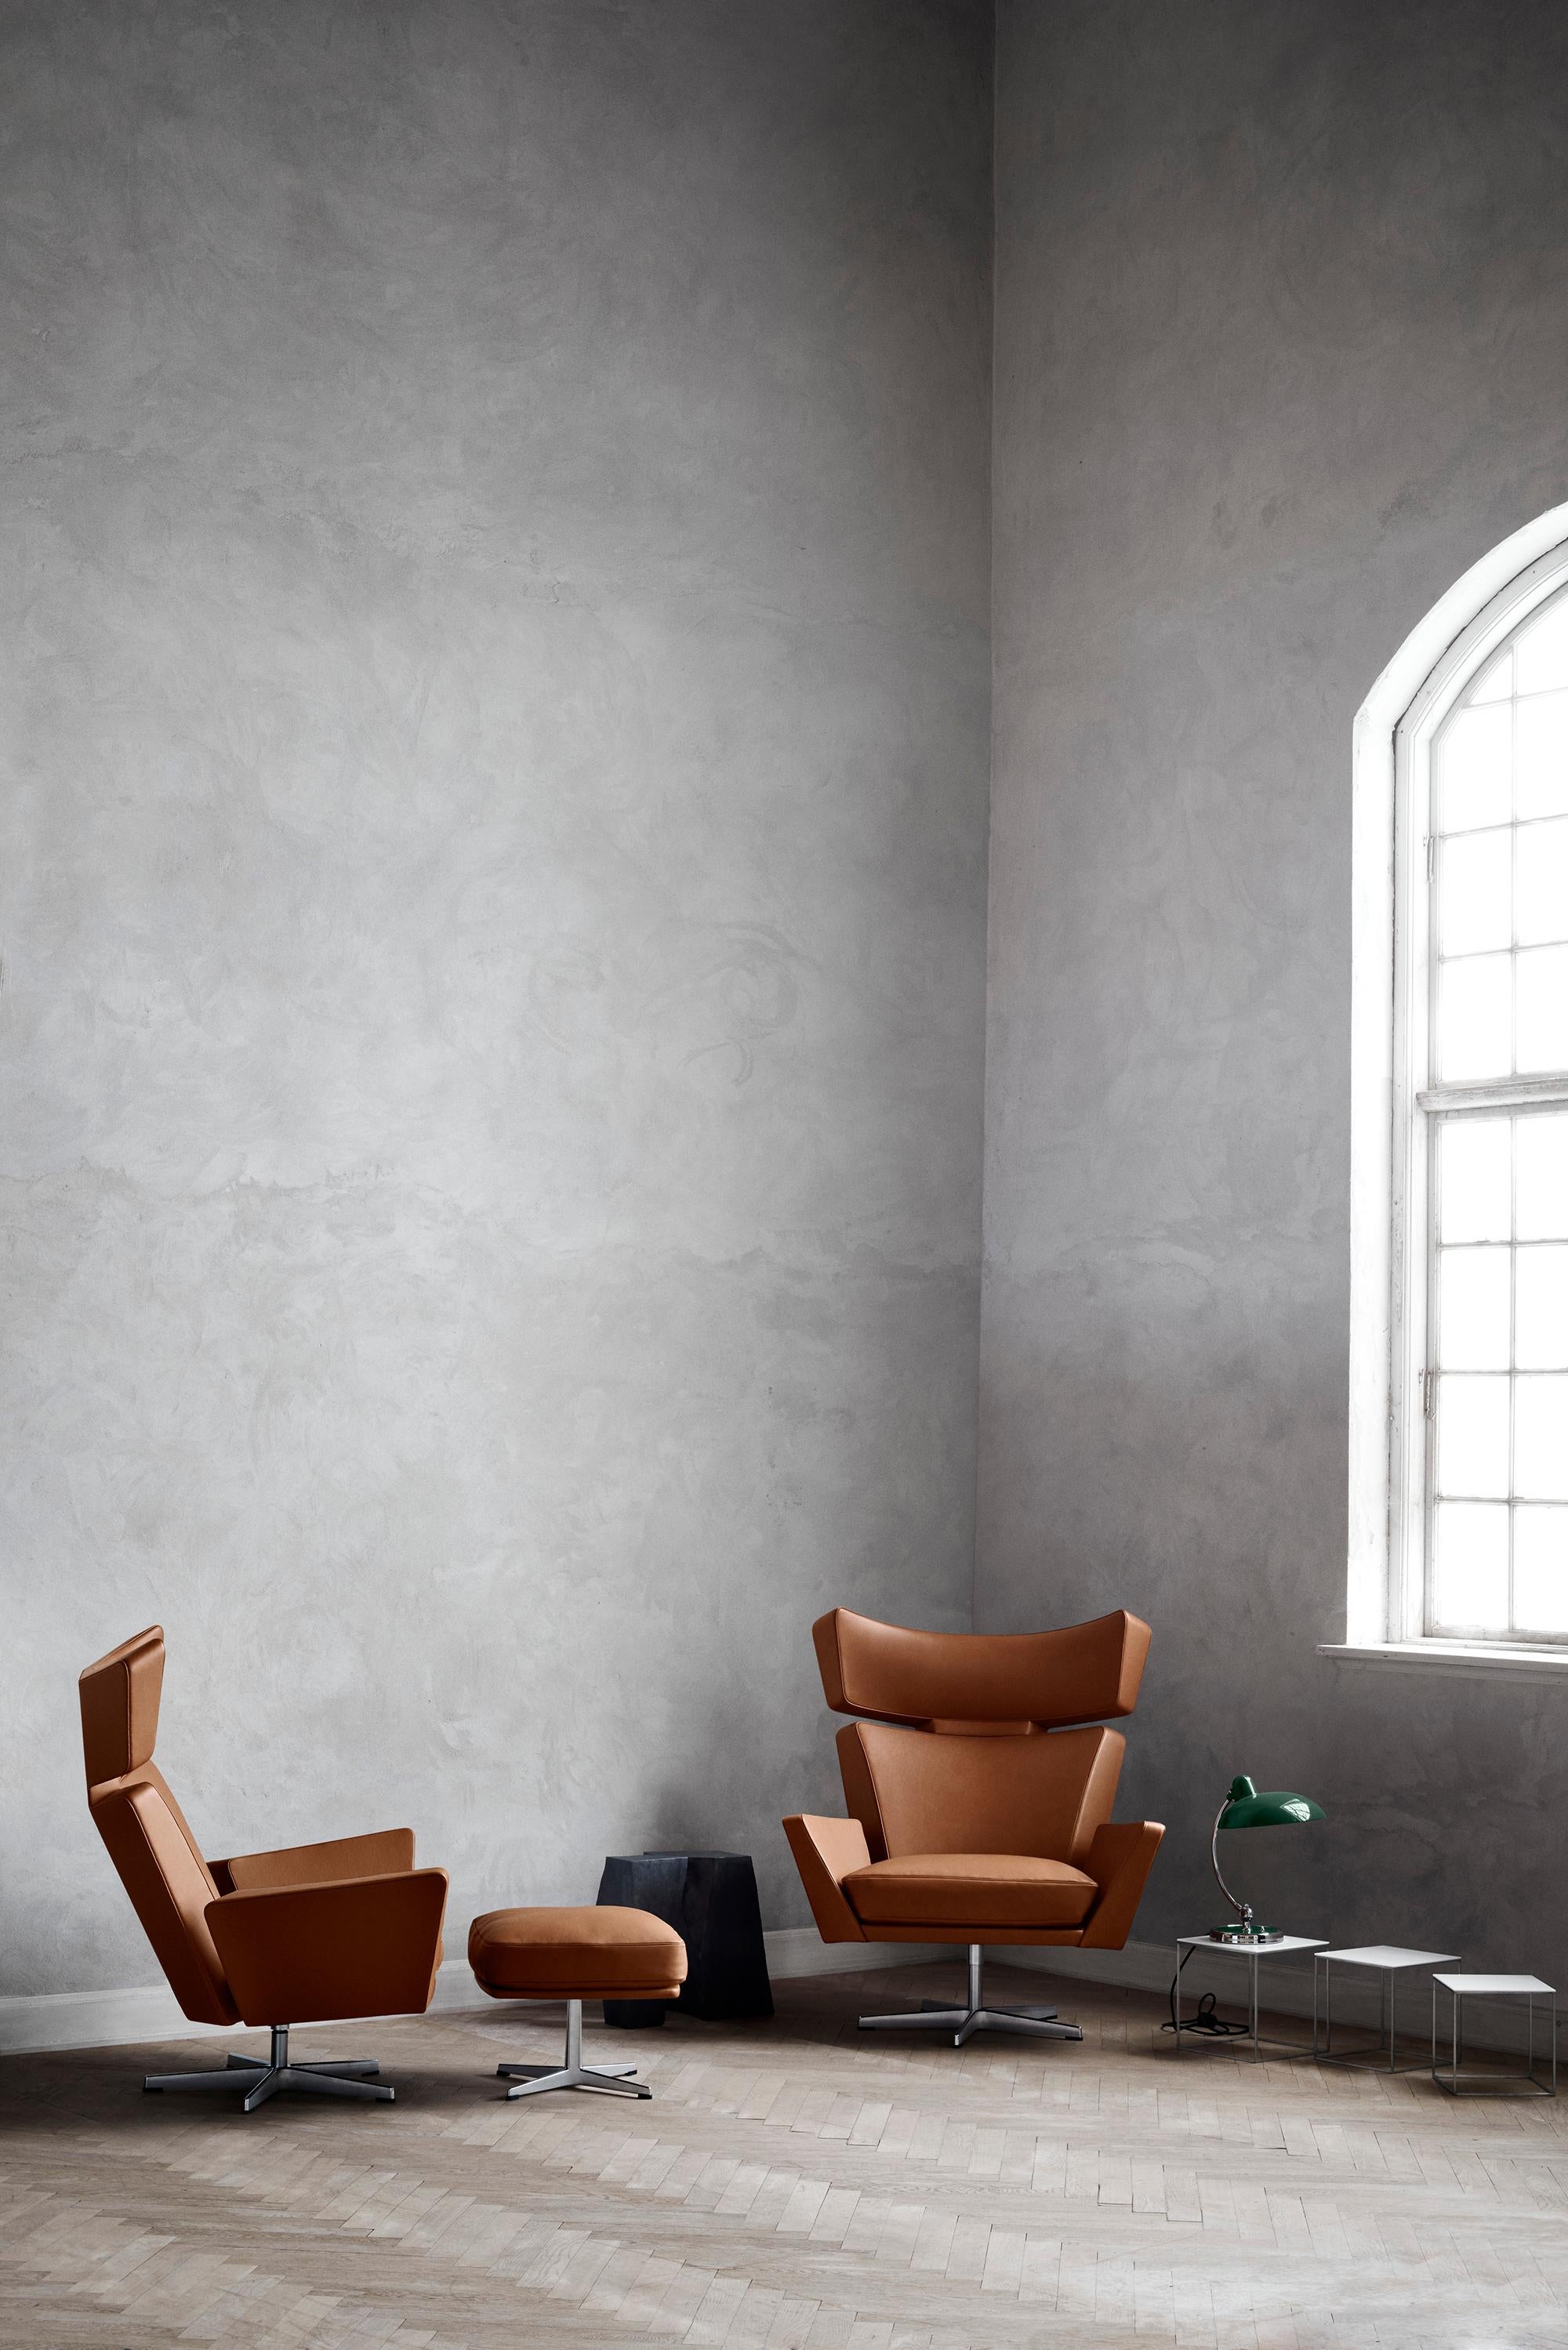 Arne Jacobsen 'Oksen' Chair for Fritz Hansen in Aura Leather Upholstery.

Established in 1872, Fritz Hansen has become synonymous with legendary Danish design. Combining timeless craftsmanship with an emphasis on sustainability, the brand’s